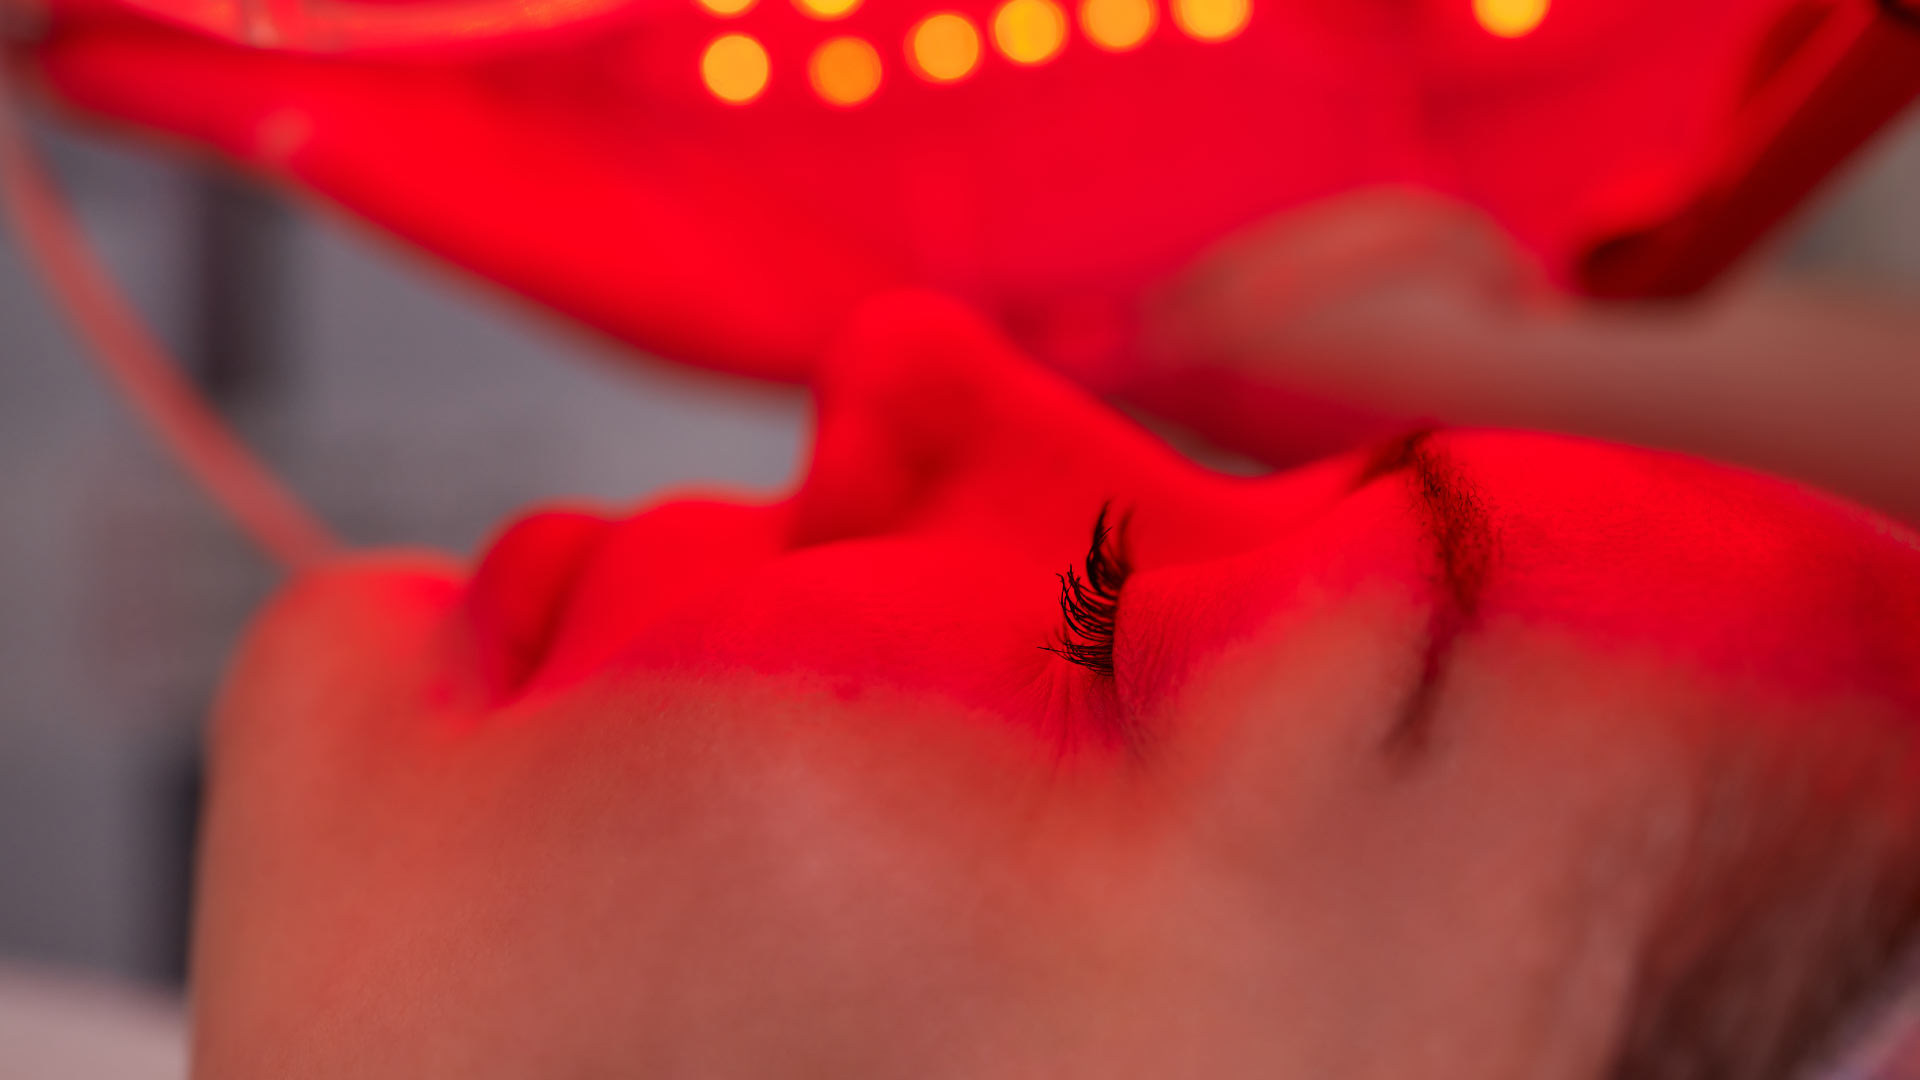 Benefits of Red Light Therapy at Home - American Wellness Authority